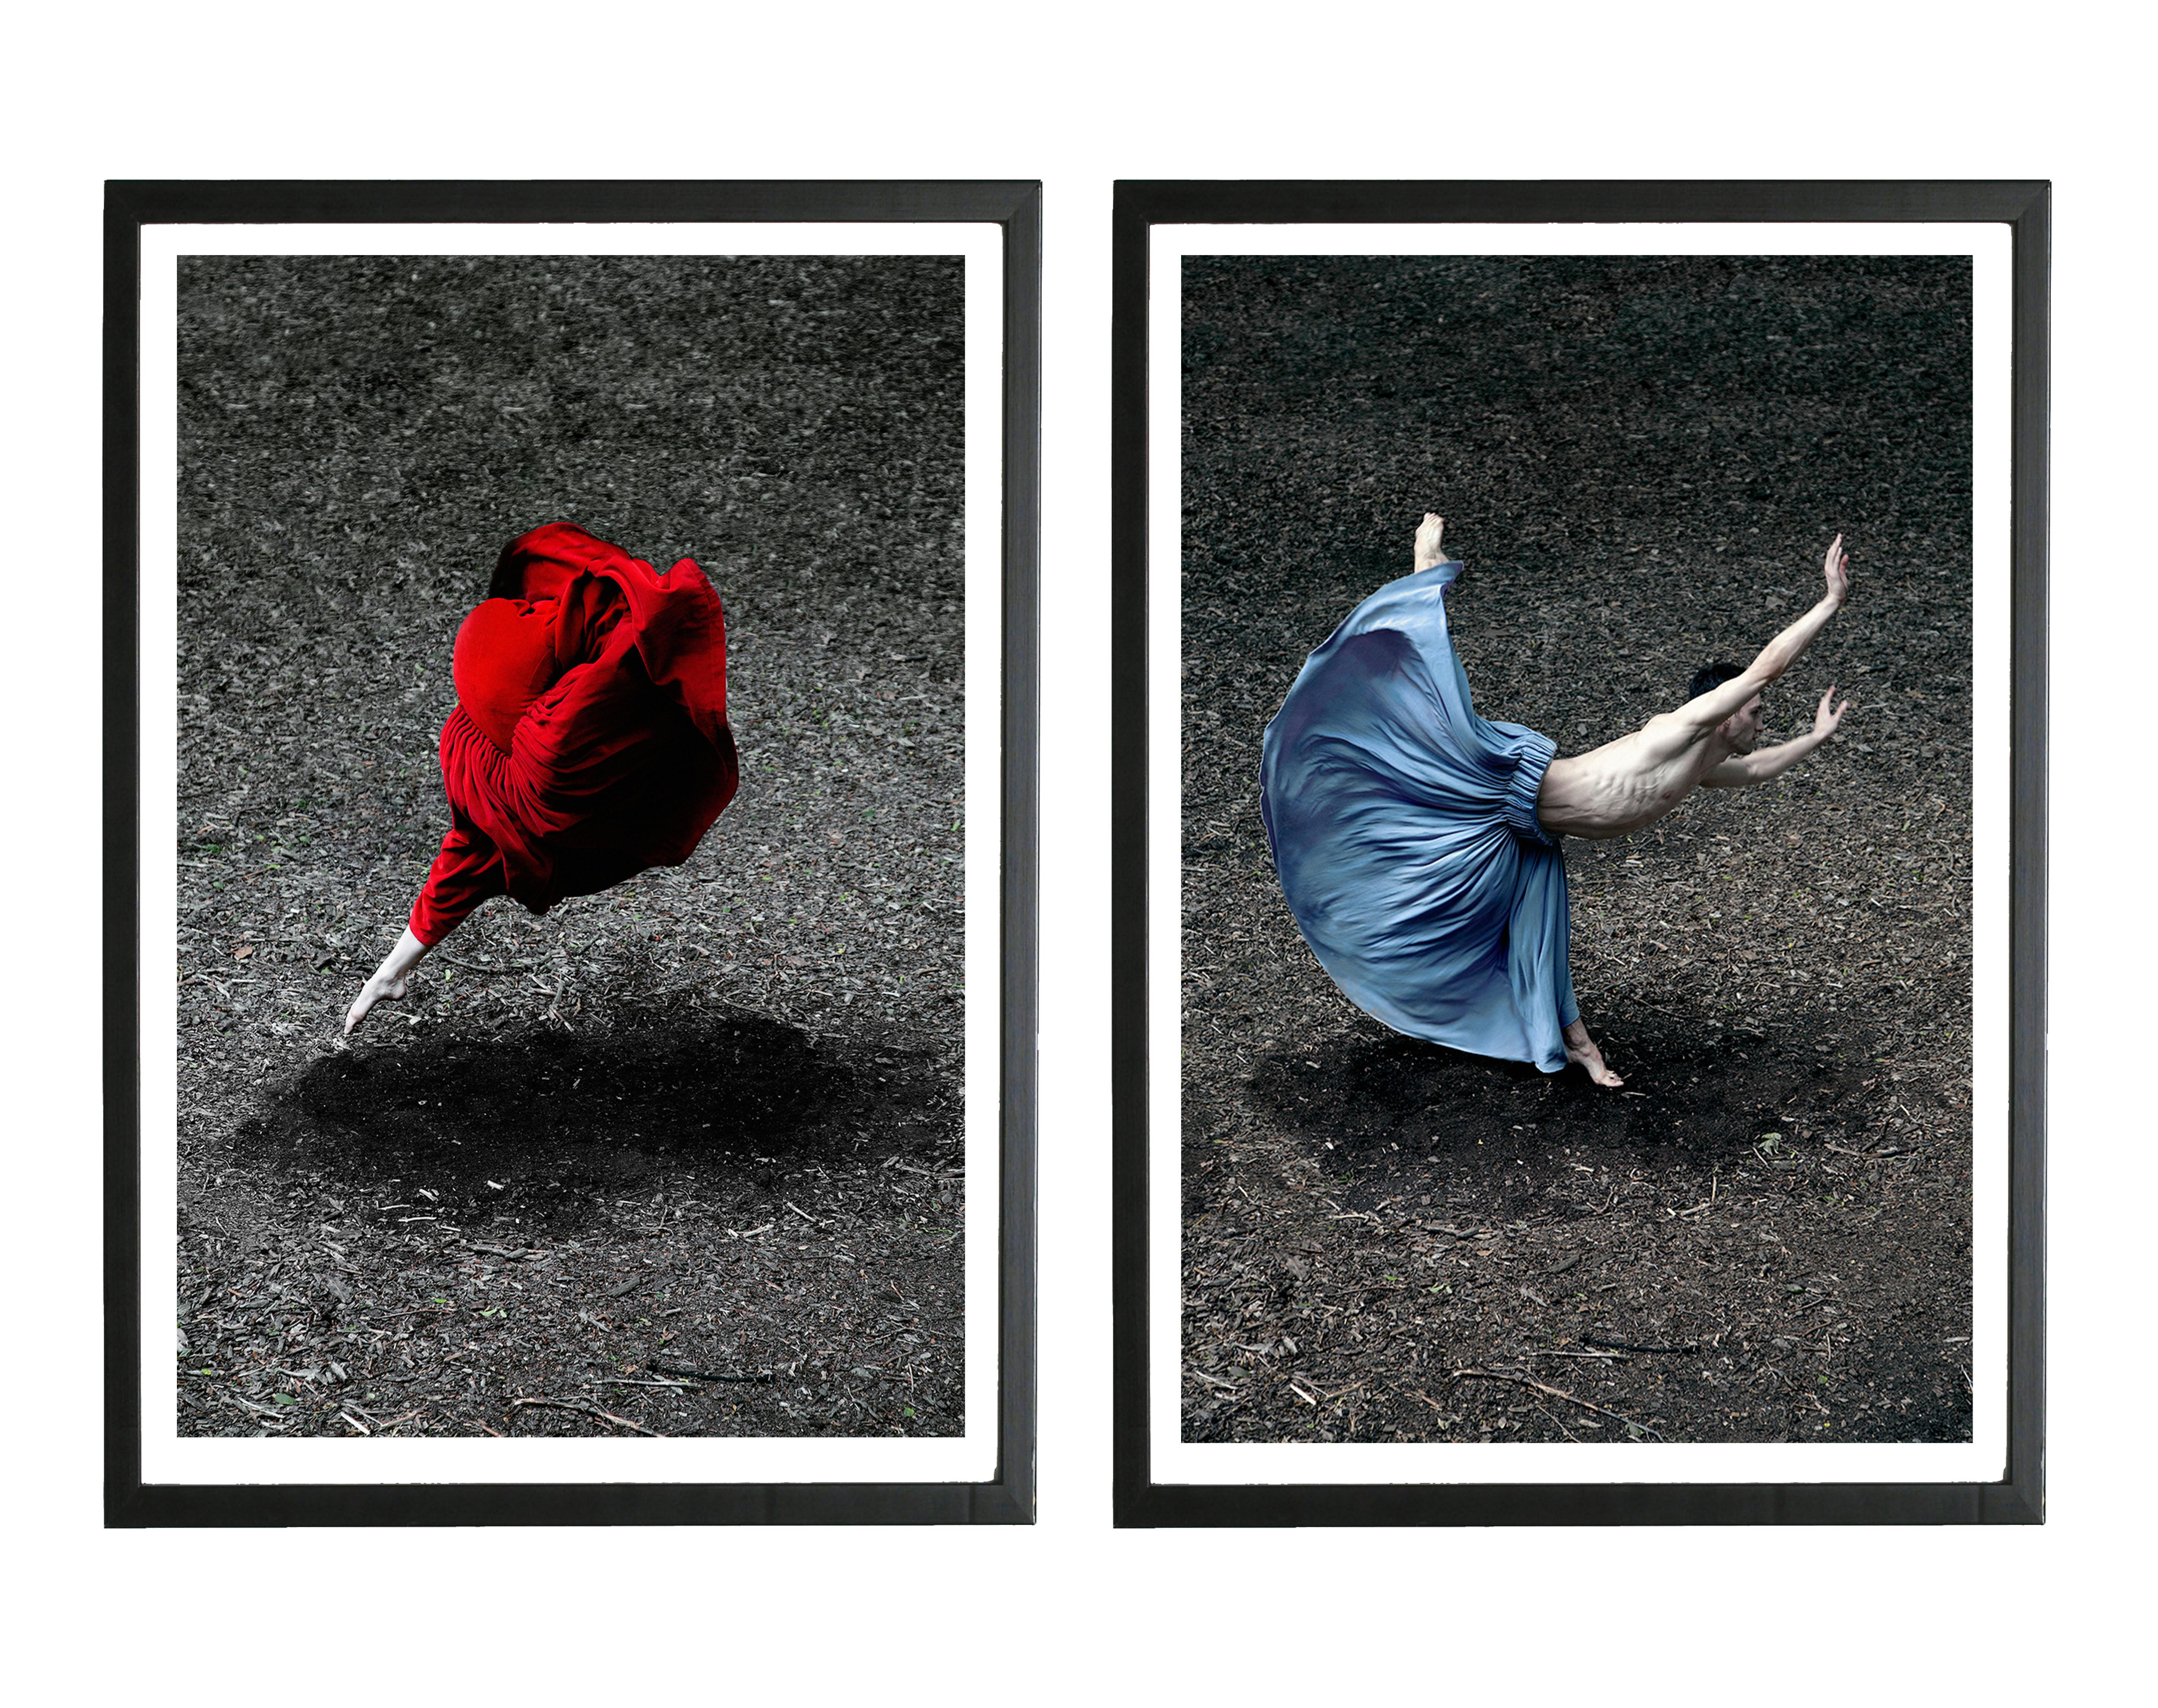 Guilherme Licurgo Color Photograph - Desert Rose and Booming Flower II. Diptych. Framed.